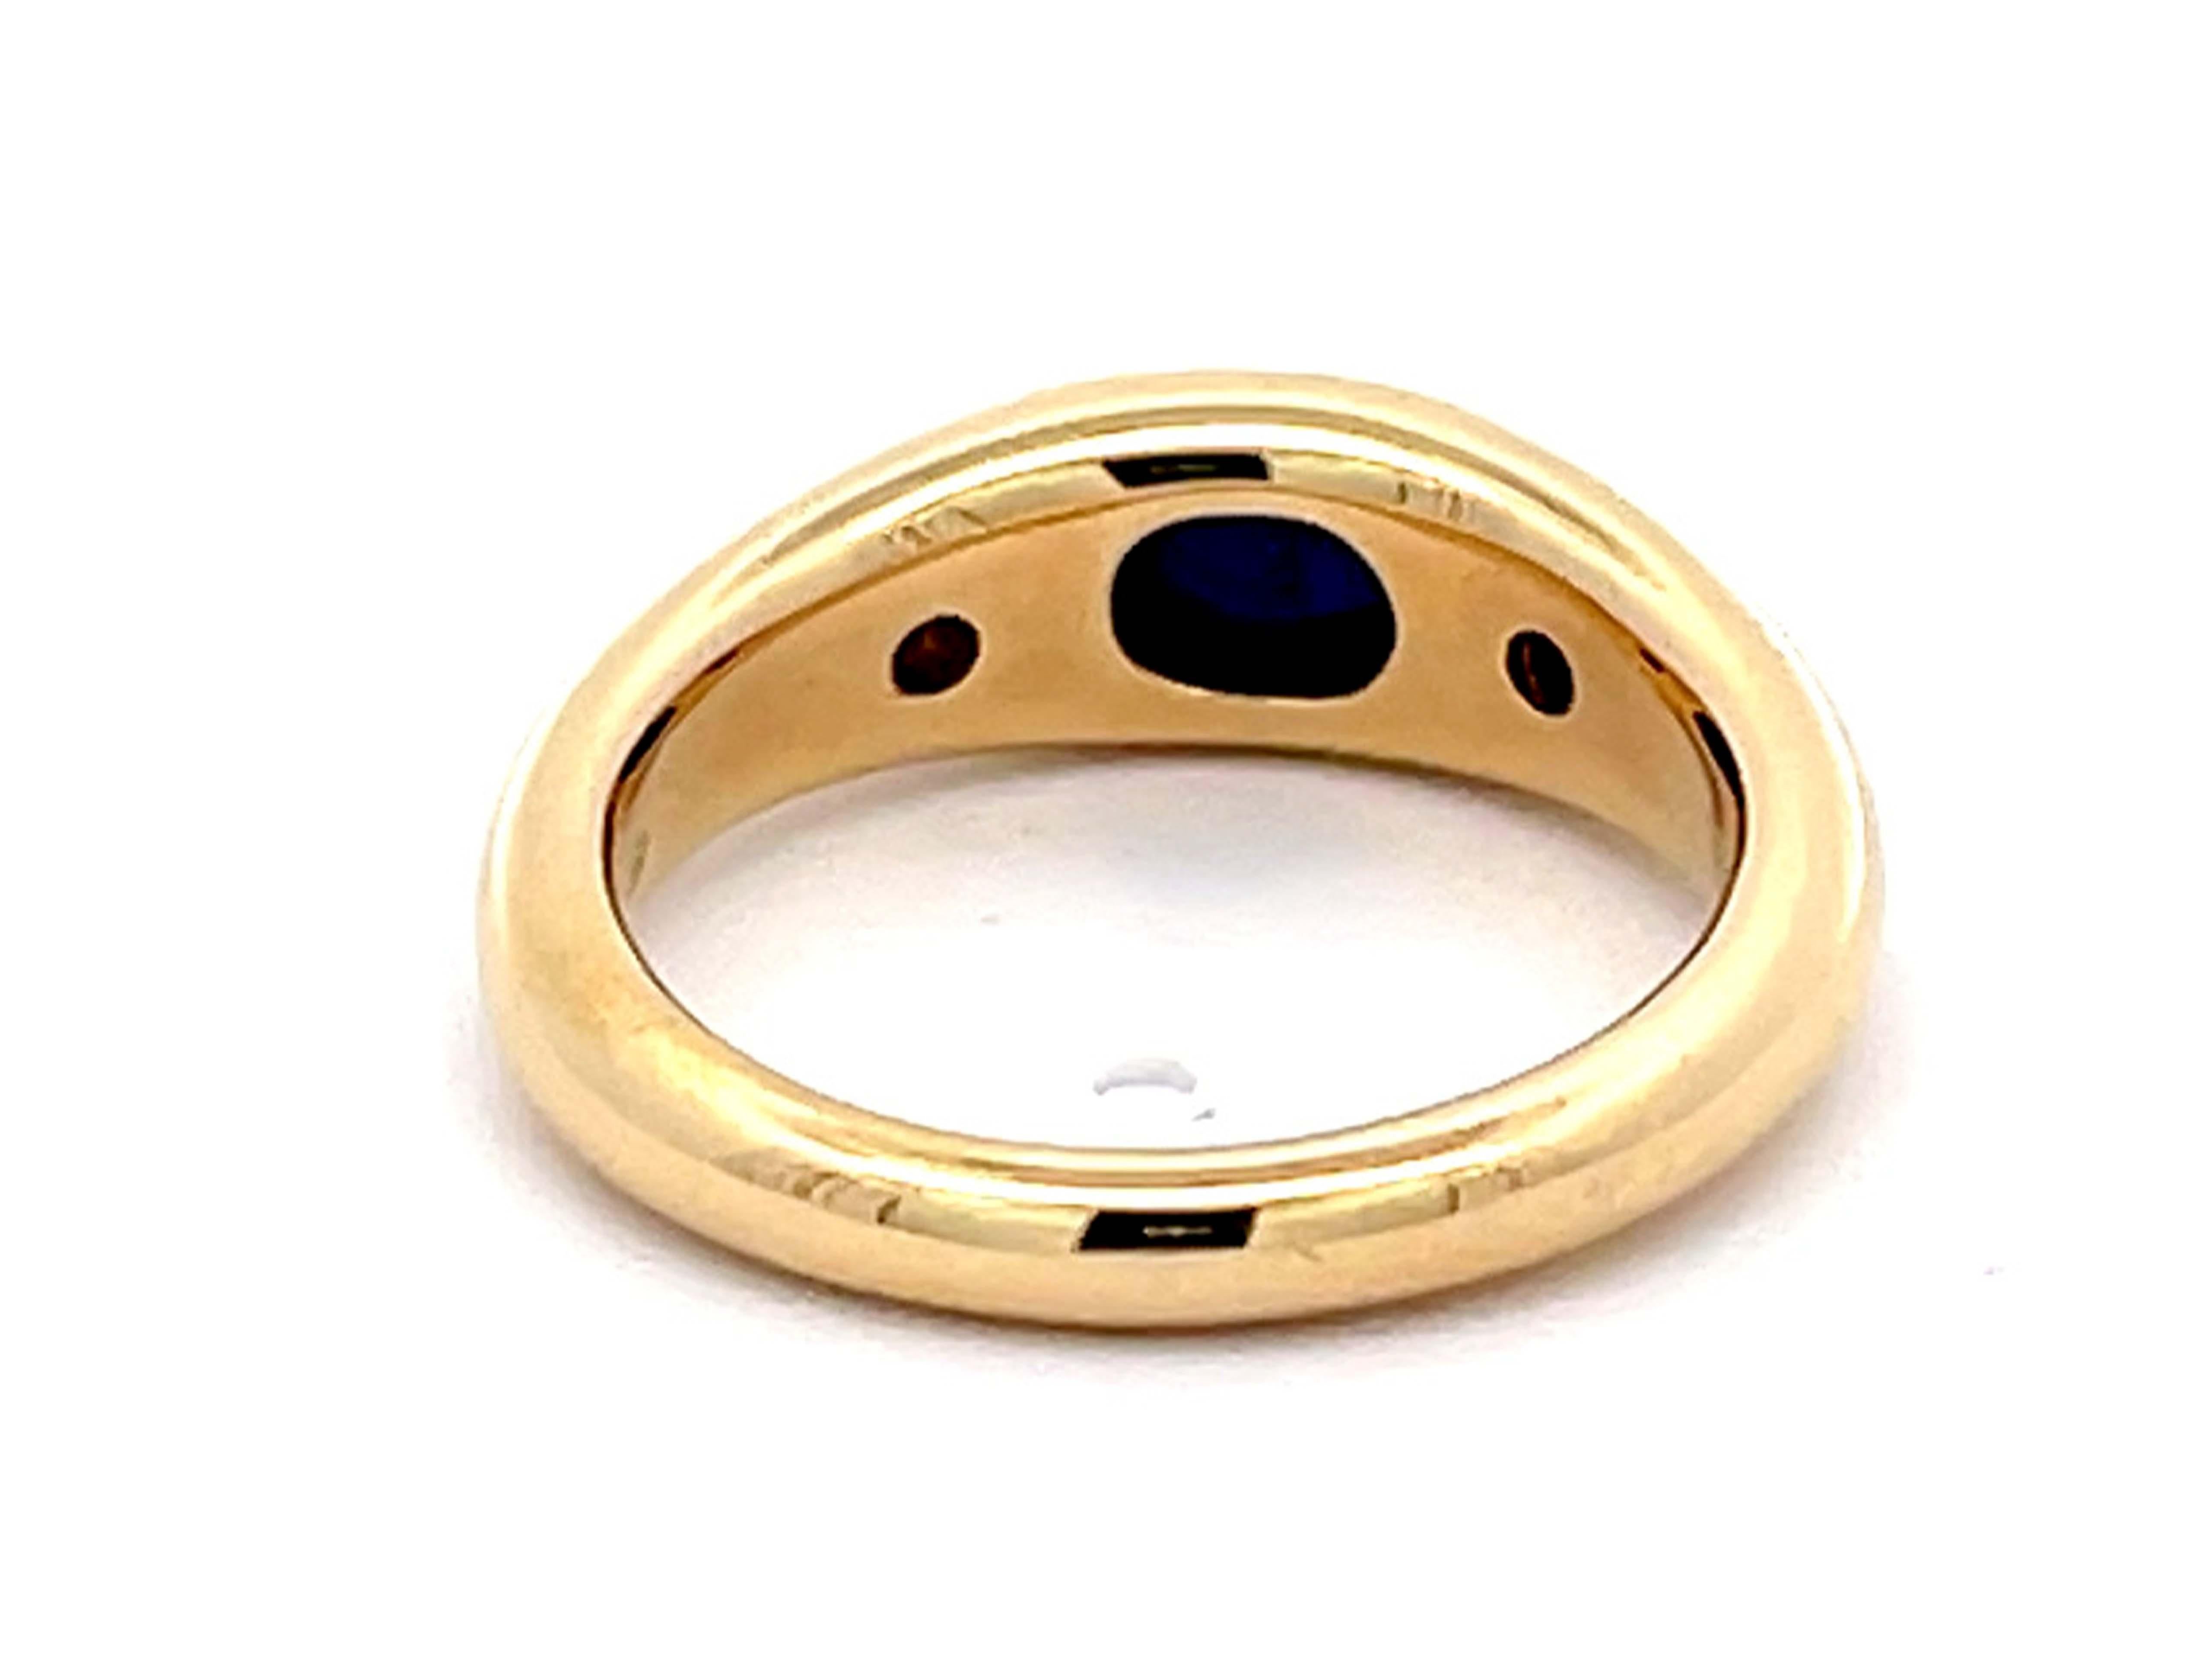 Oval Cabochon Blue Sapphire Diamond Ring in 18k Yellow Gold In New Condition For Sale In Honolulu, HI